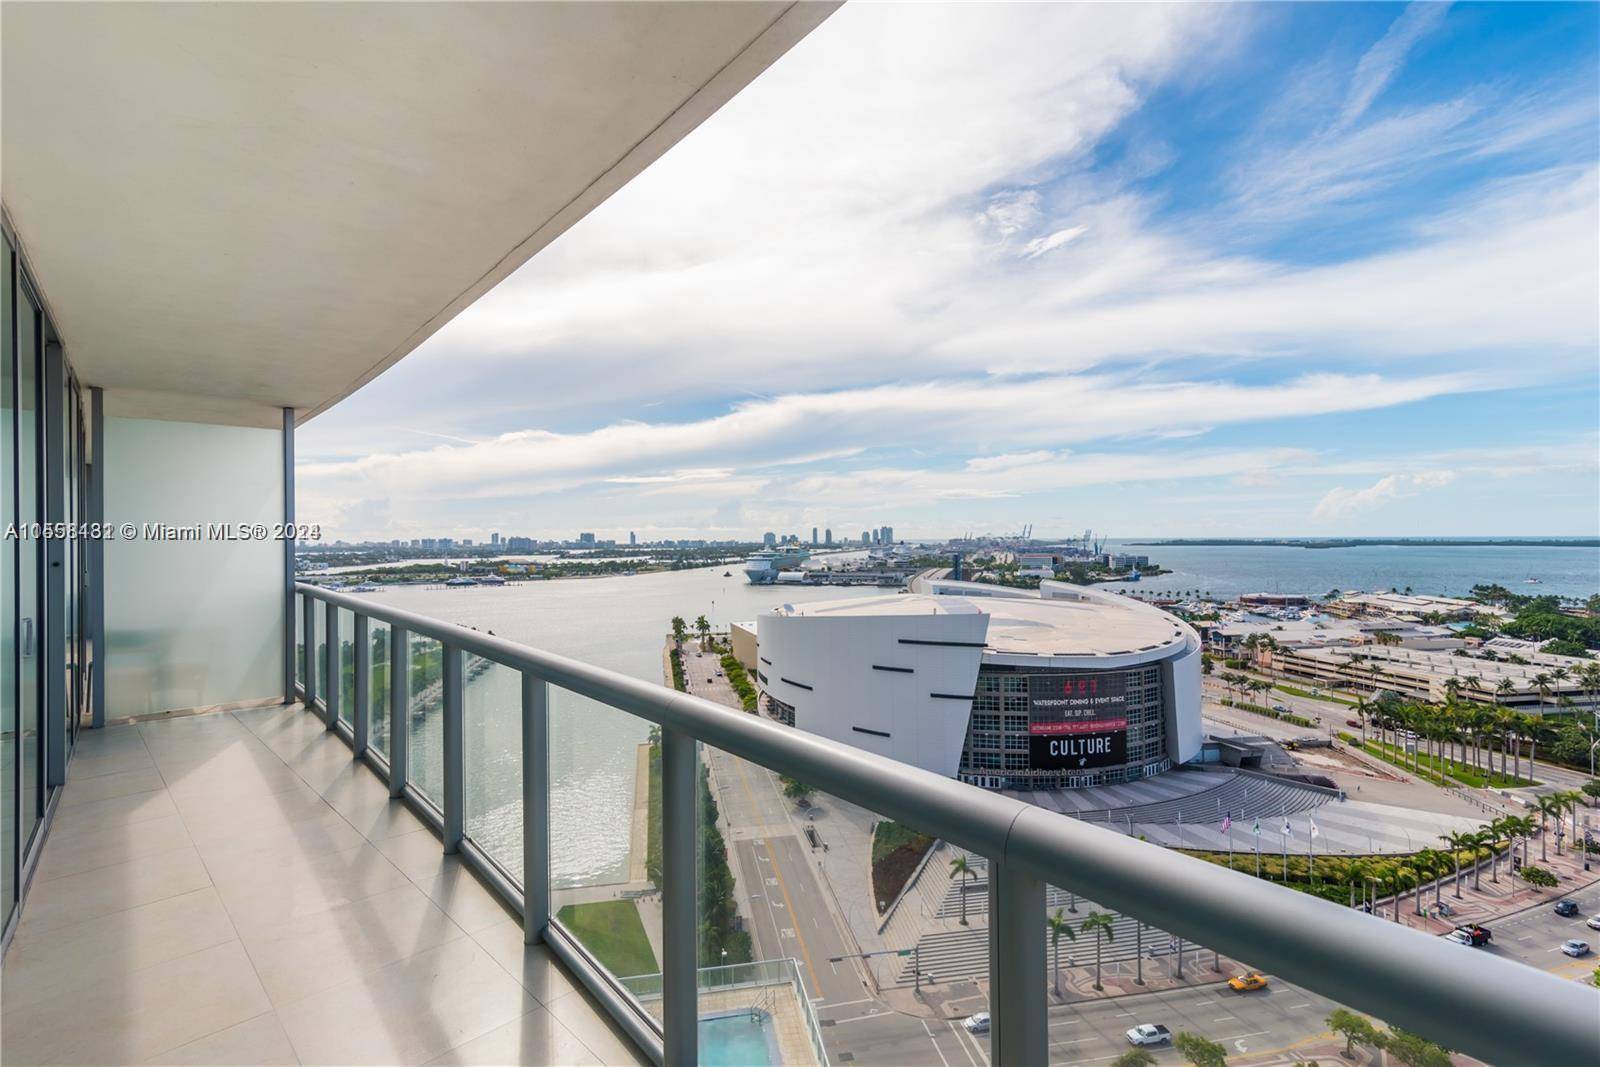 Prepare to be captivated by the stunning city and bayfront vistas that await you in this exquisite condominium nestled in the heart of Downtown Miami !